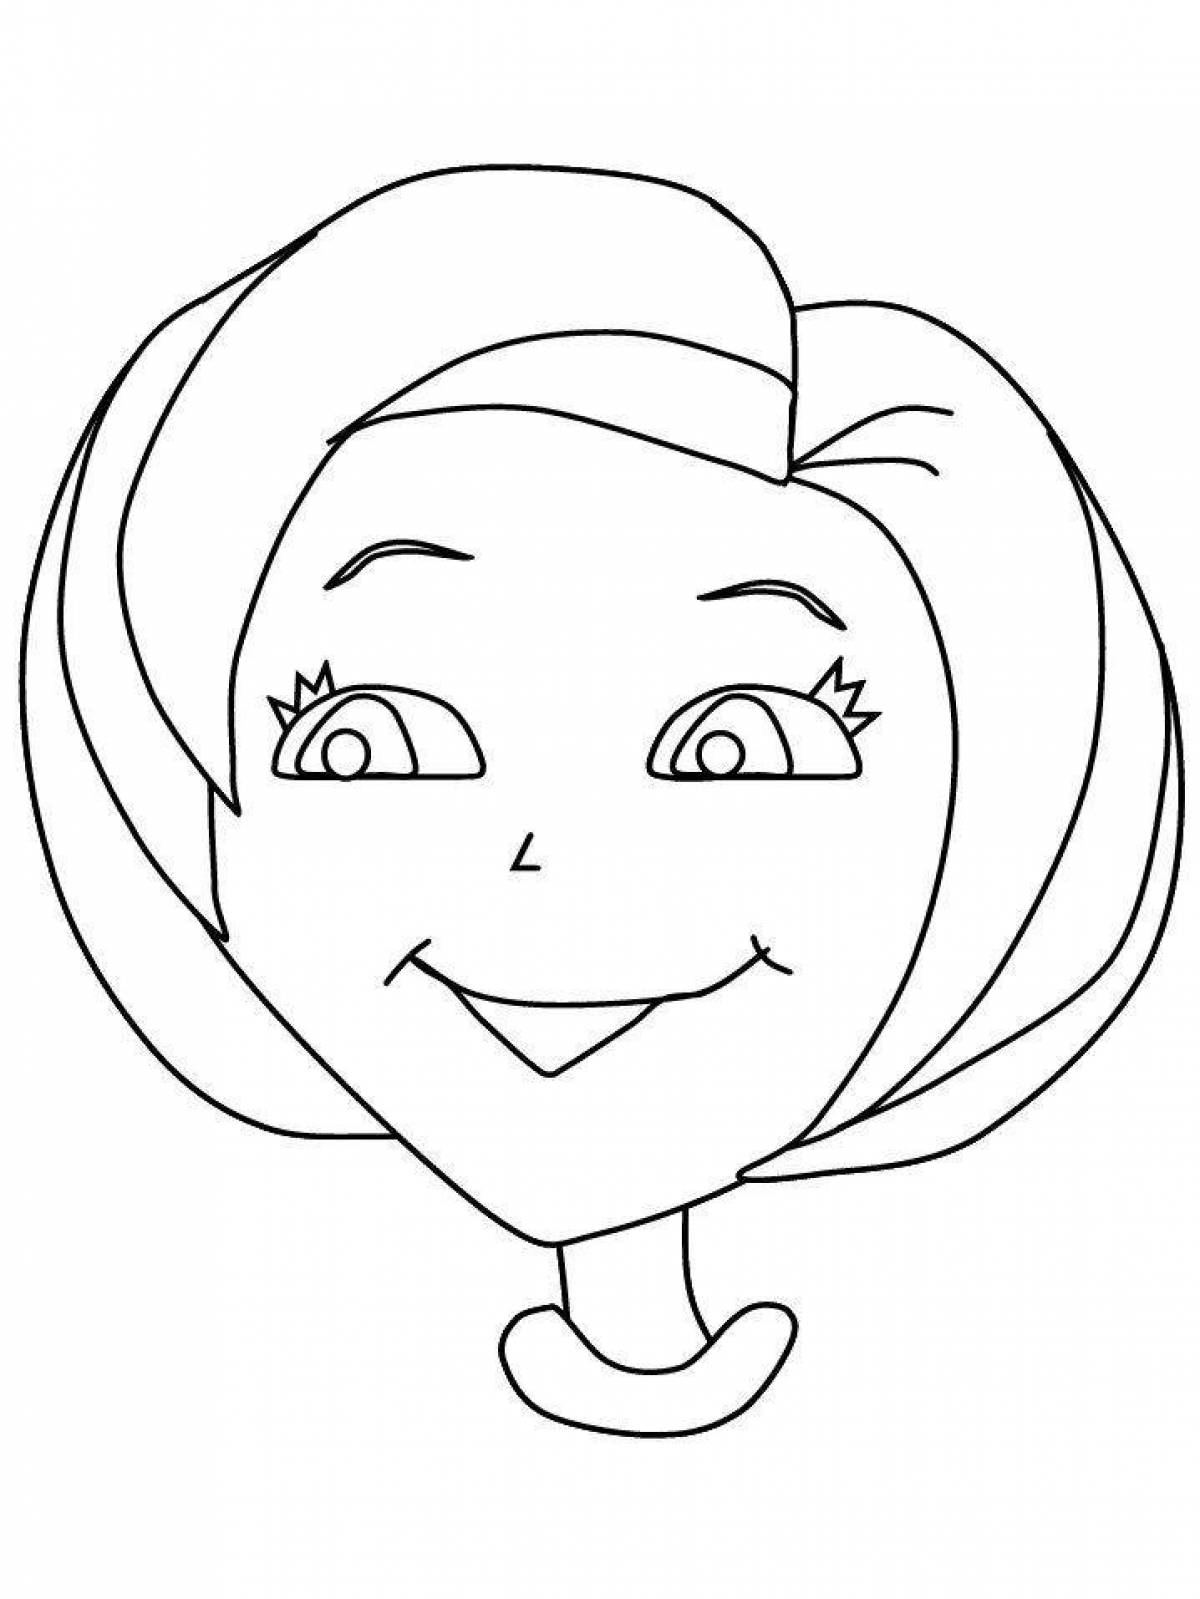 Excited face coloring page